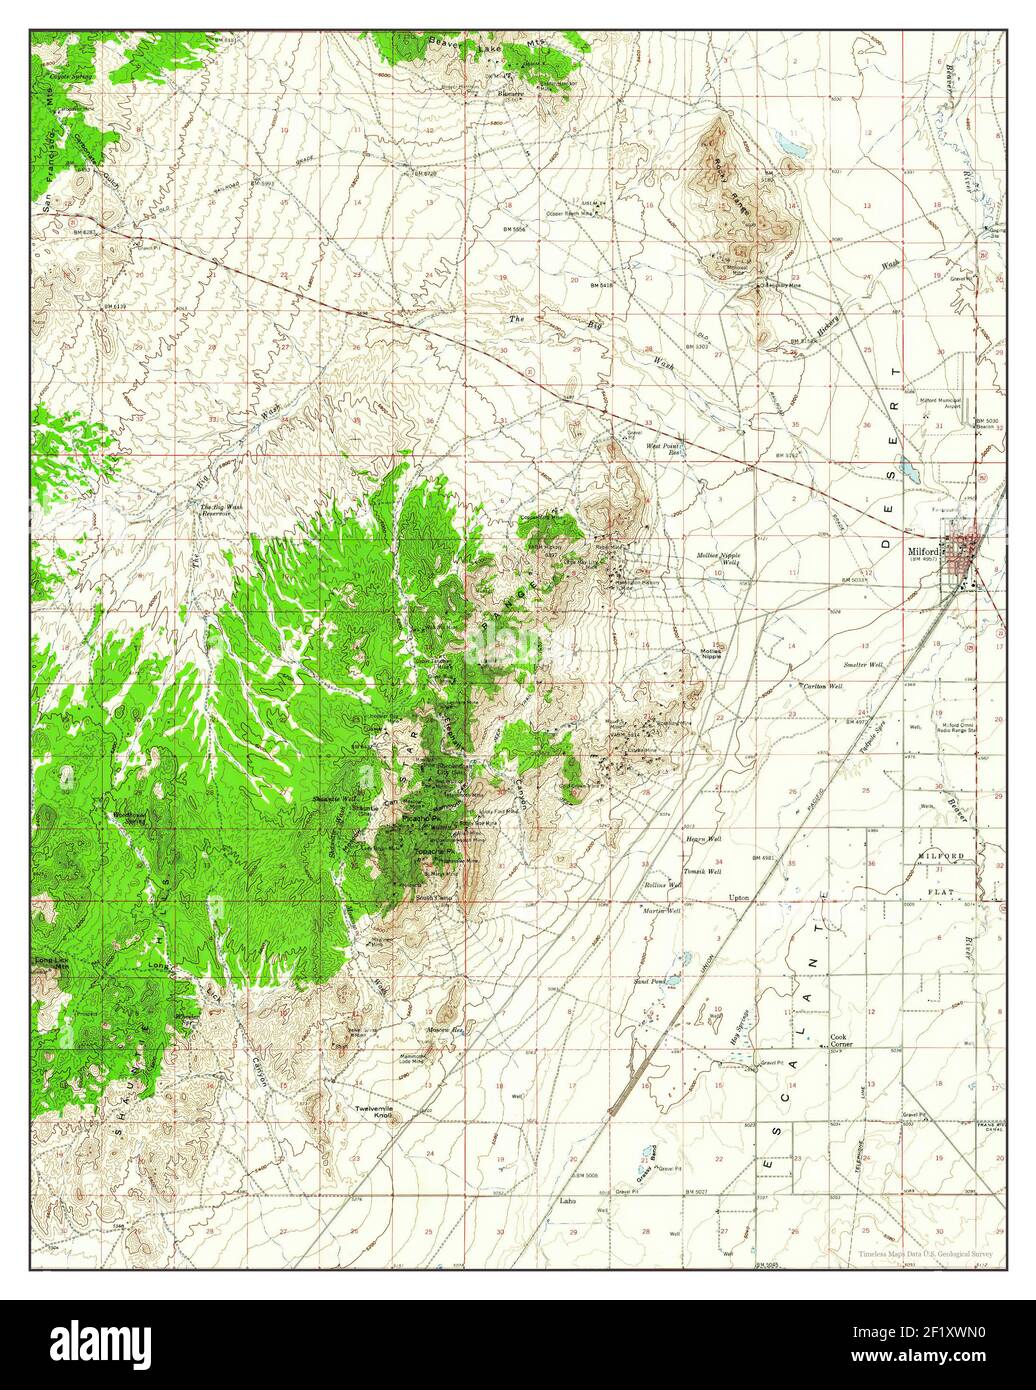 Milford Utah Map 1958 162500 United States Of America By Timeless Maps Data Us Geological Survey 2F1XWN0 